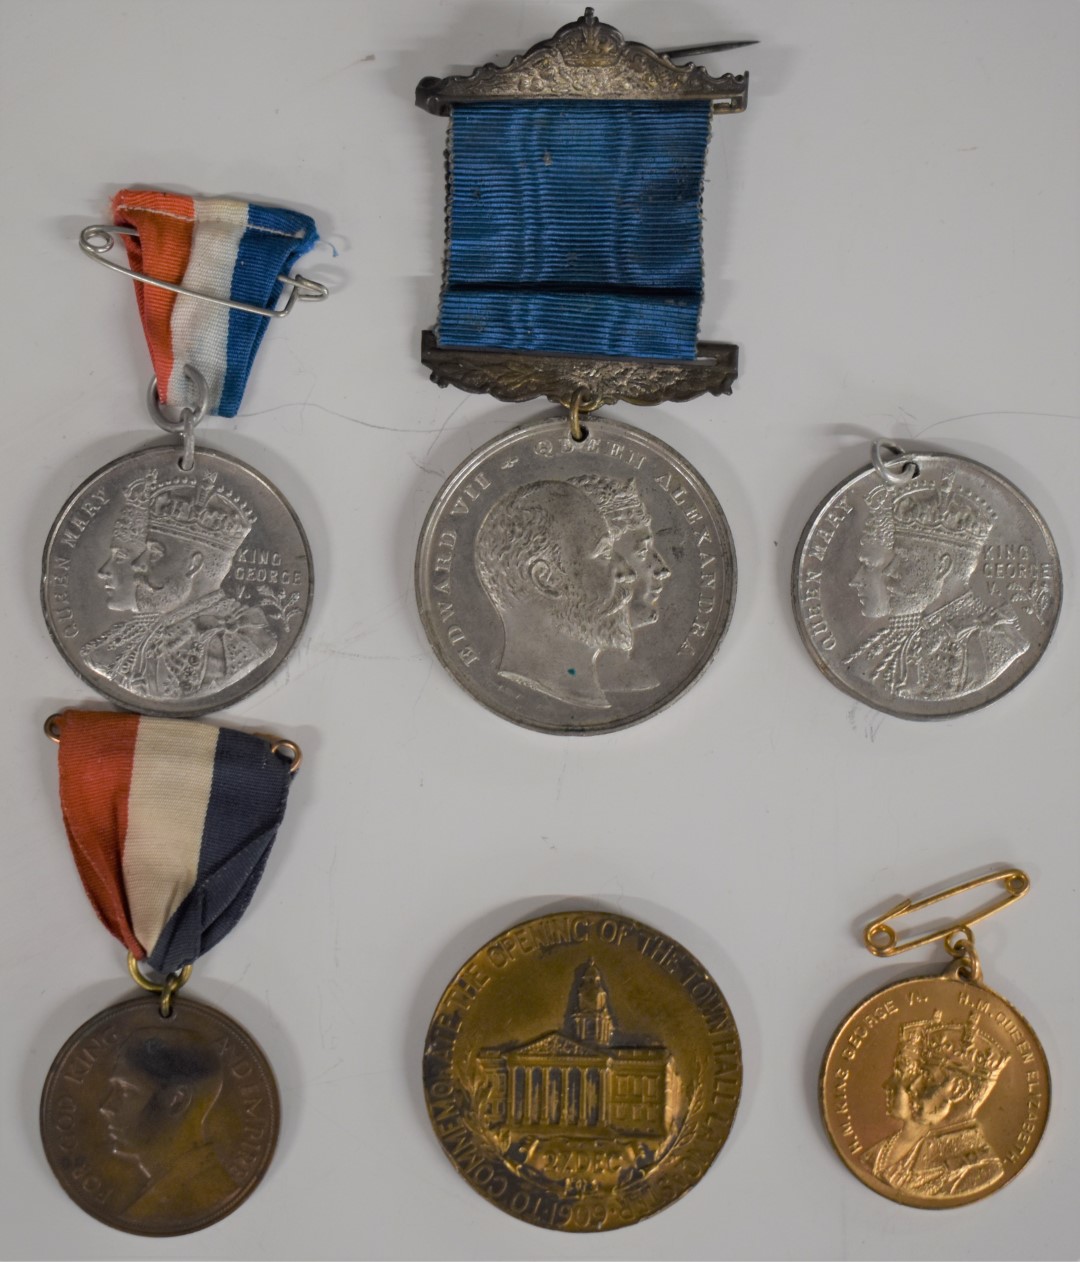 Six commemorative medals including 1937 Coronation of George VI and 1935 Silver Jubilee both